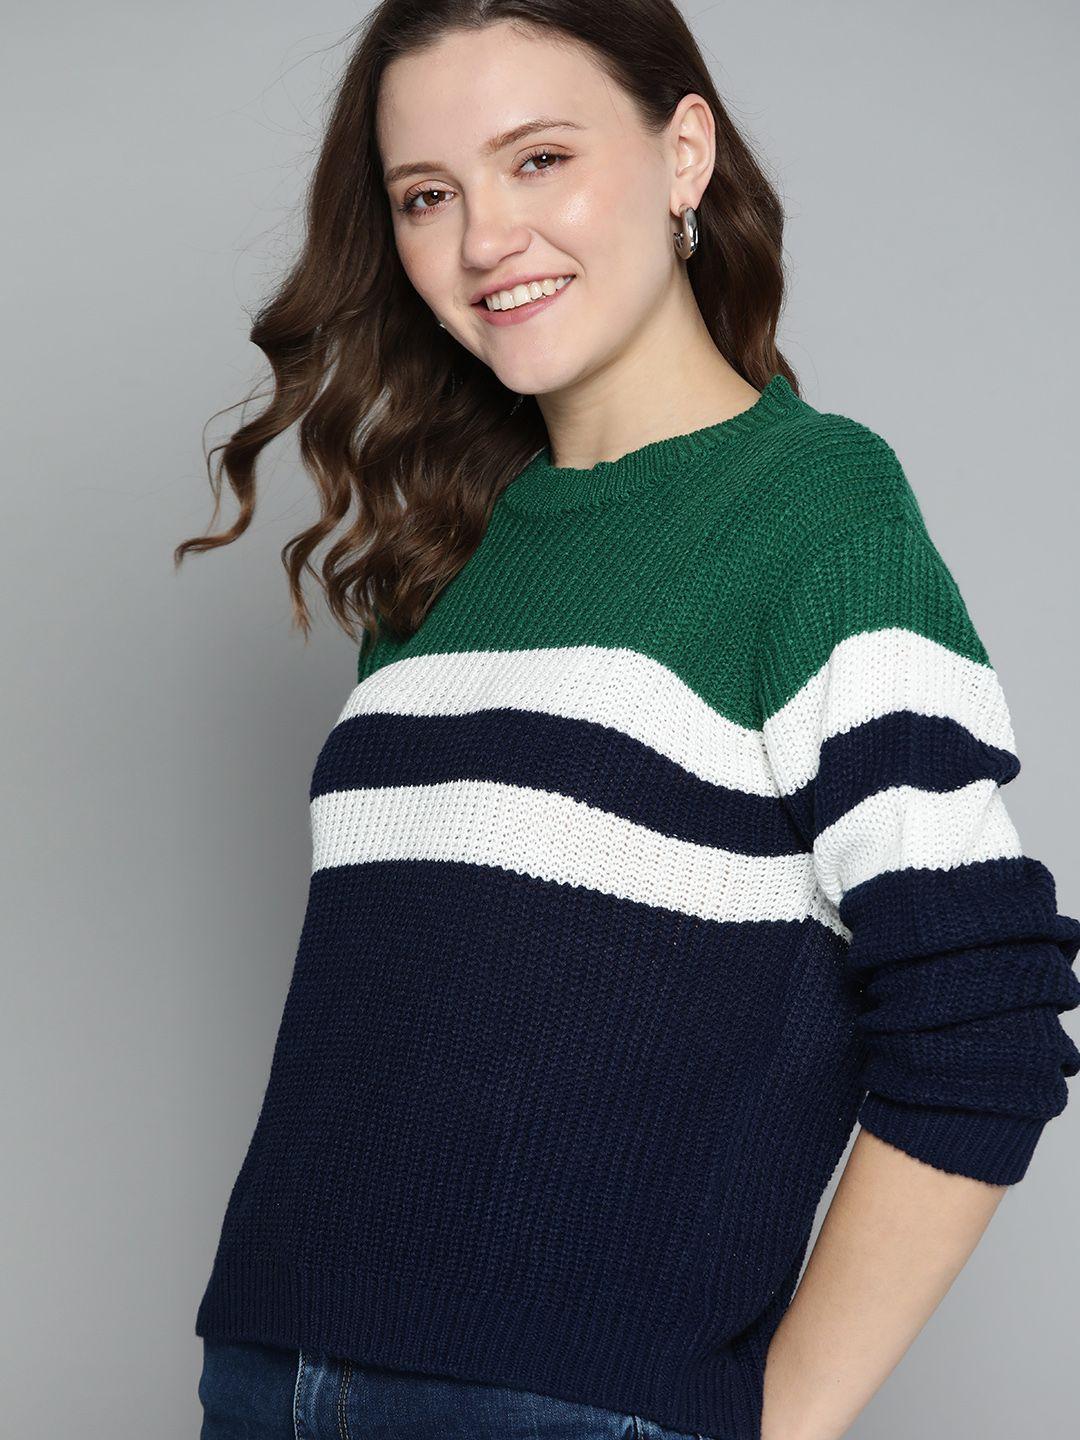 mast-&-harbour-women-green-&-navy-blue-striped-pullover